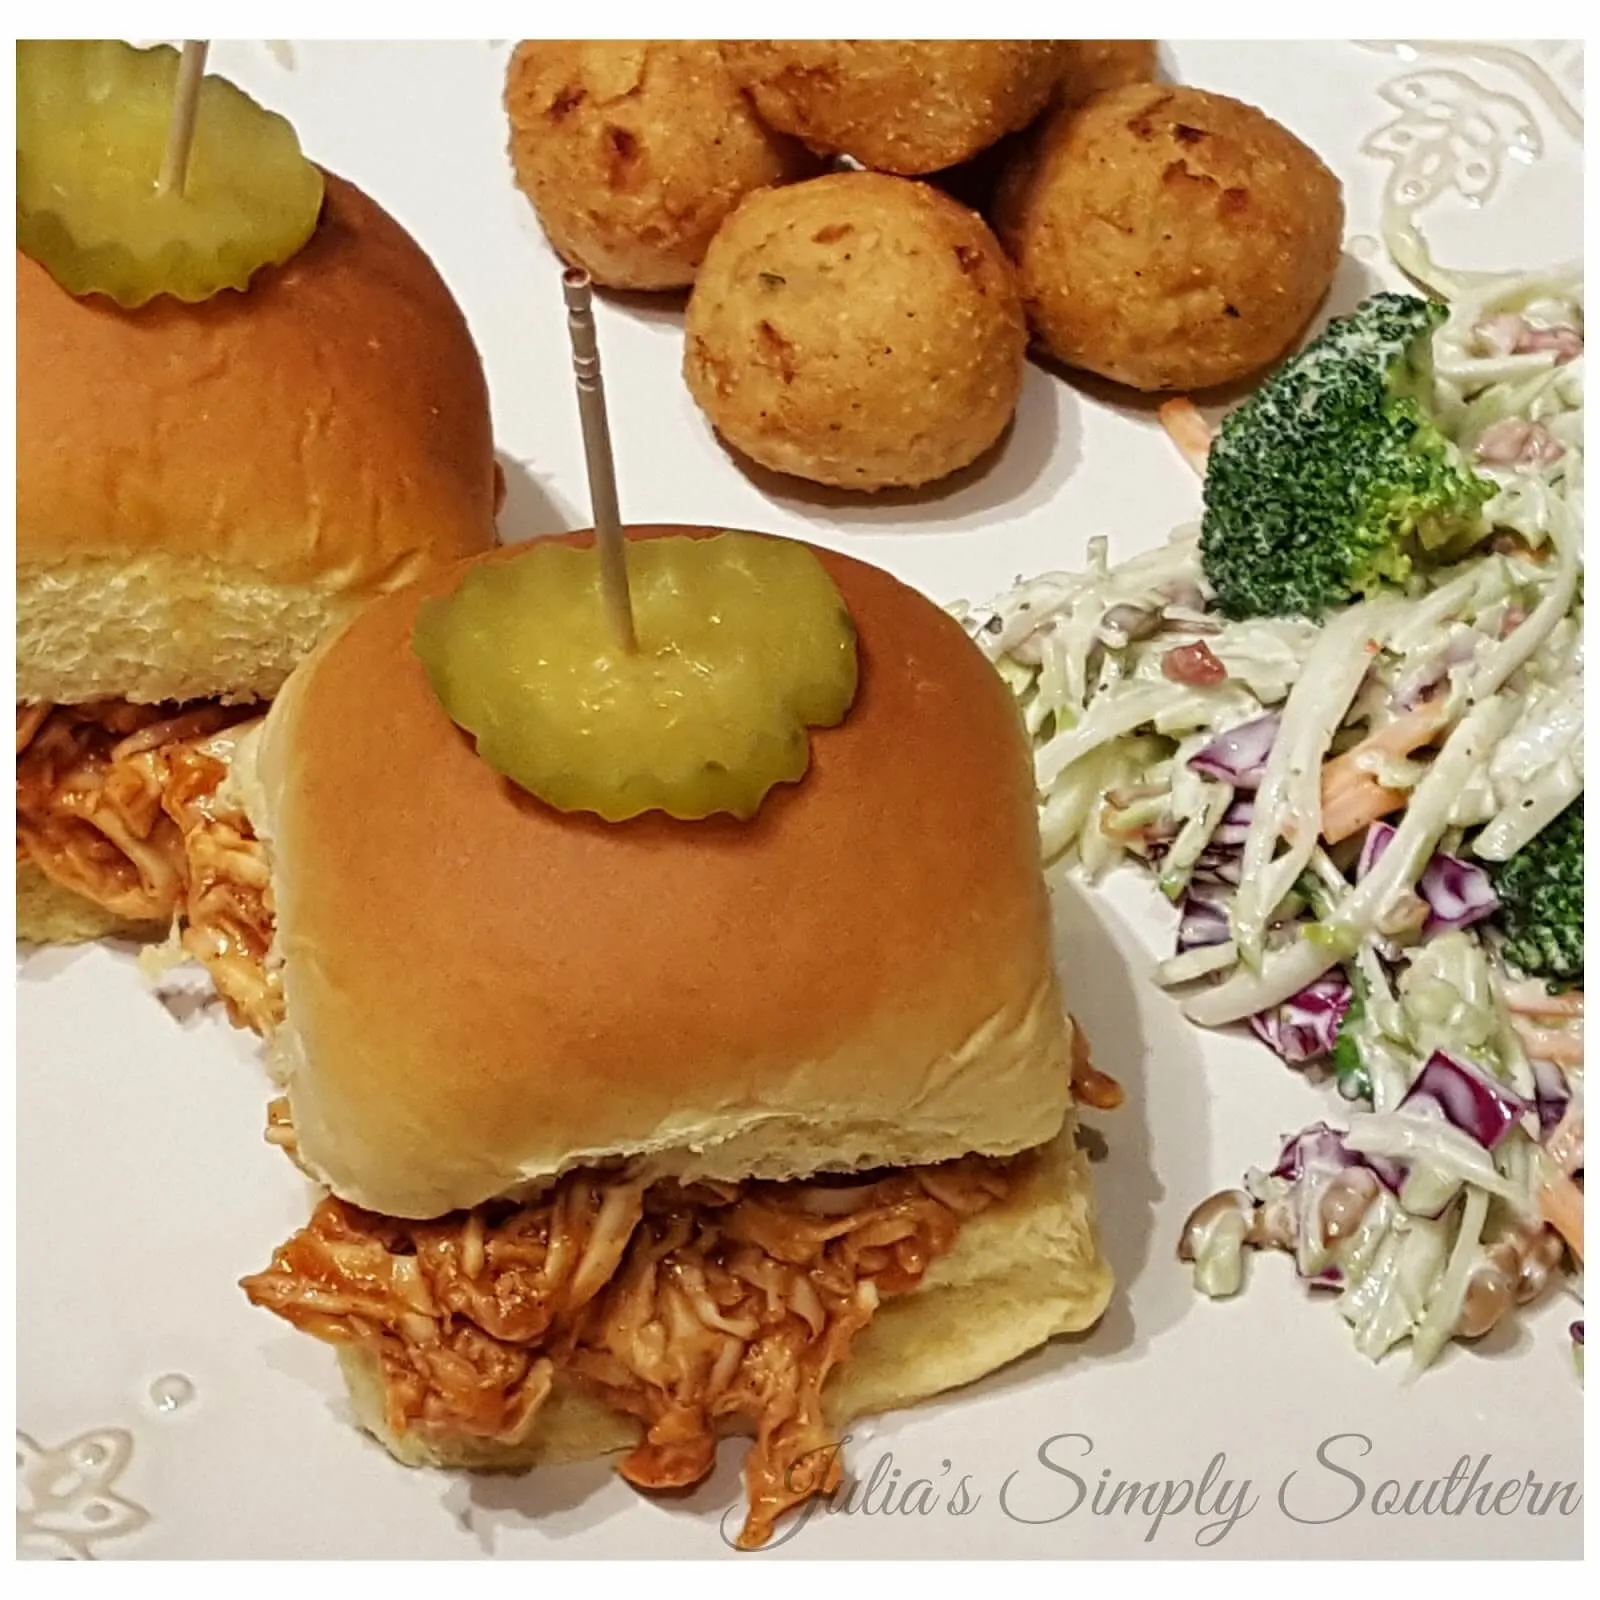 BBQ Chicken Sliders served with slaw and hush puppies